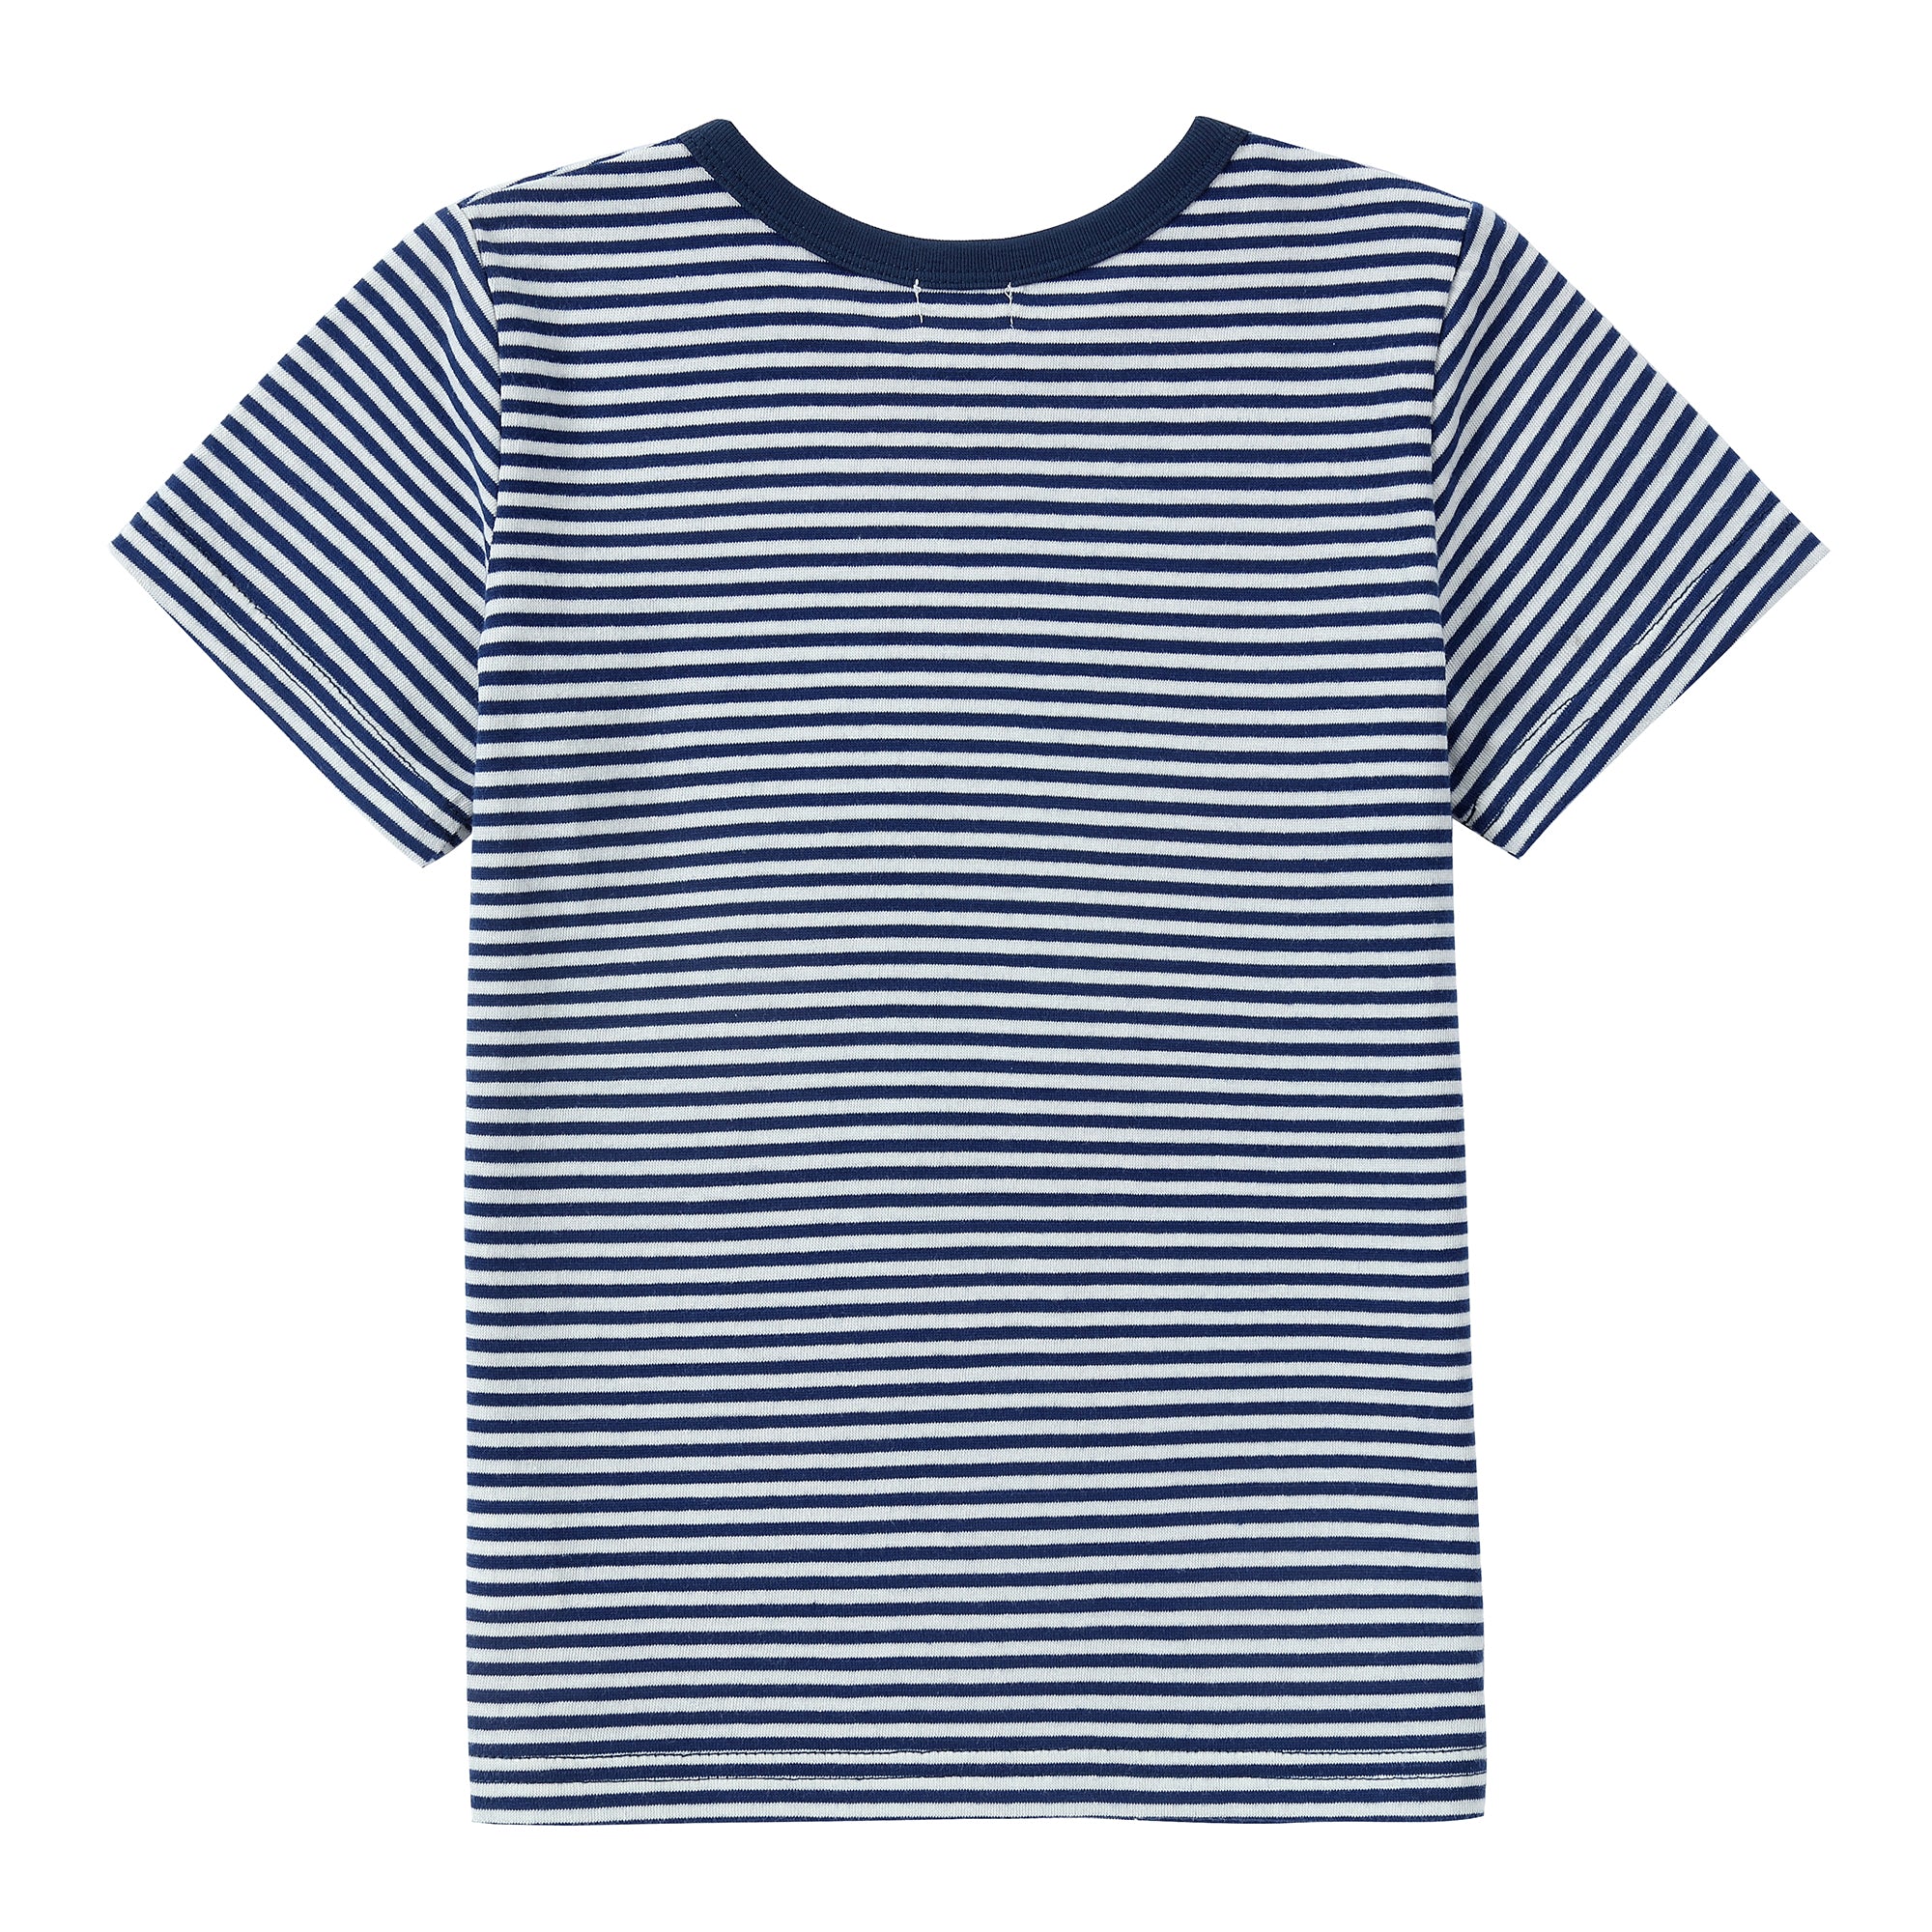 Navy and White Striped T-Shirt With Sailboat Print